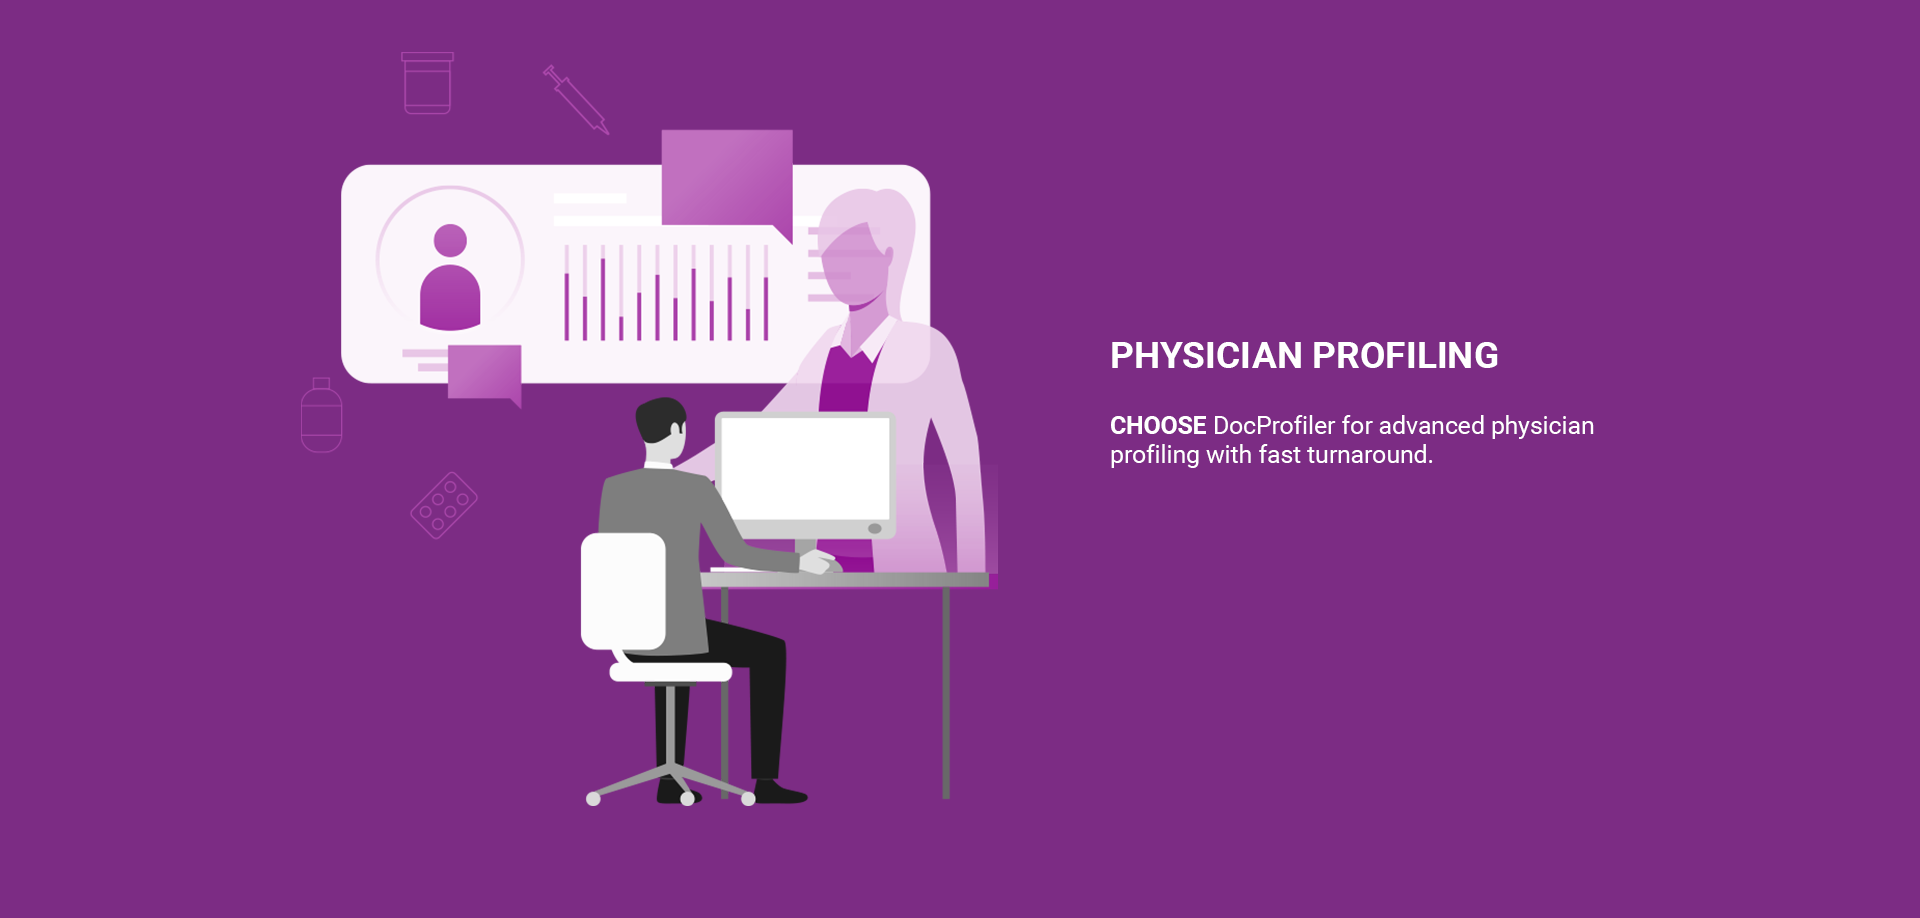 Purple graphic depicting a person working at a computer with an oversized screen displaying charts and a silhouette of a doctor, accompanied by the text "PHYSICIAN PROFILING."